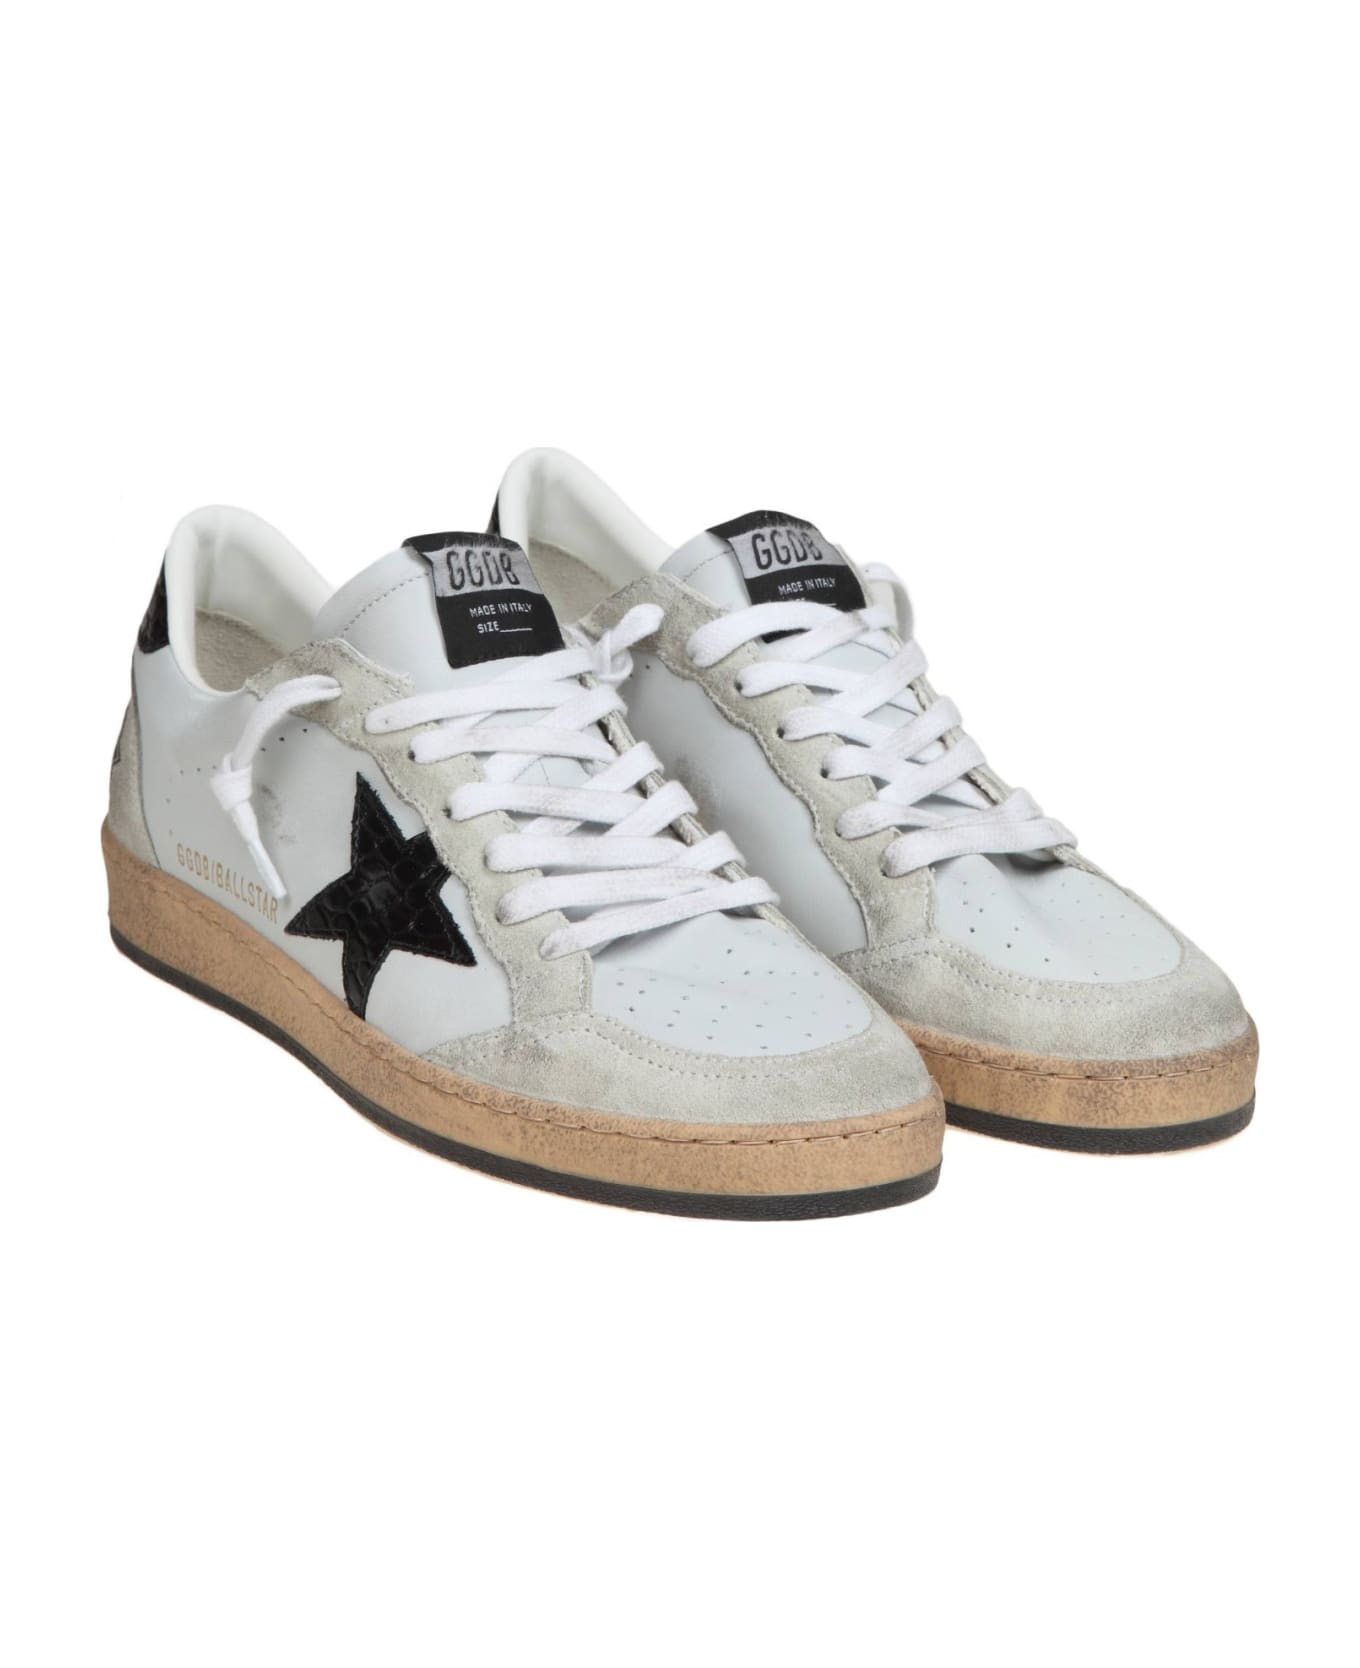 Golden Goose Ballstar In Ice Color Leather And Suede - GRAY/ICE/BLK スニーカー